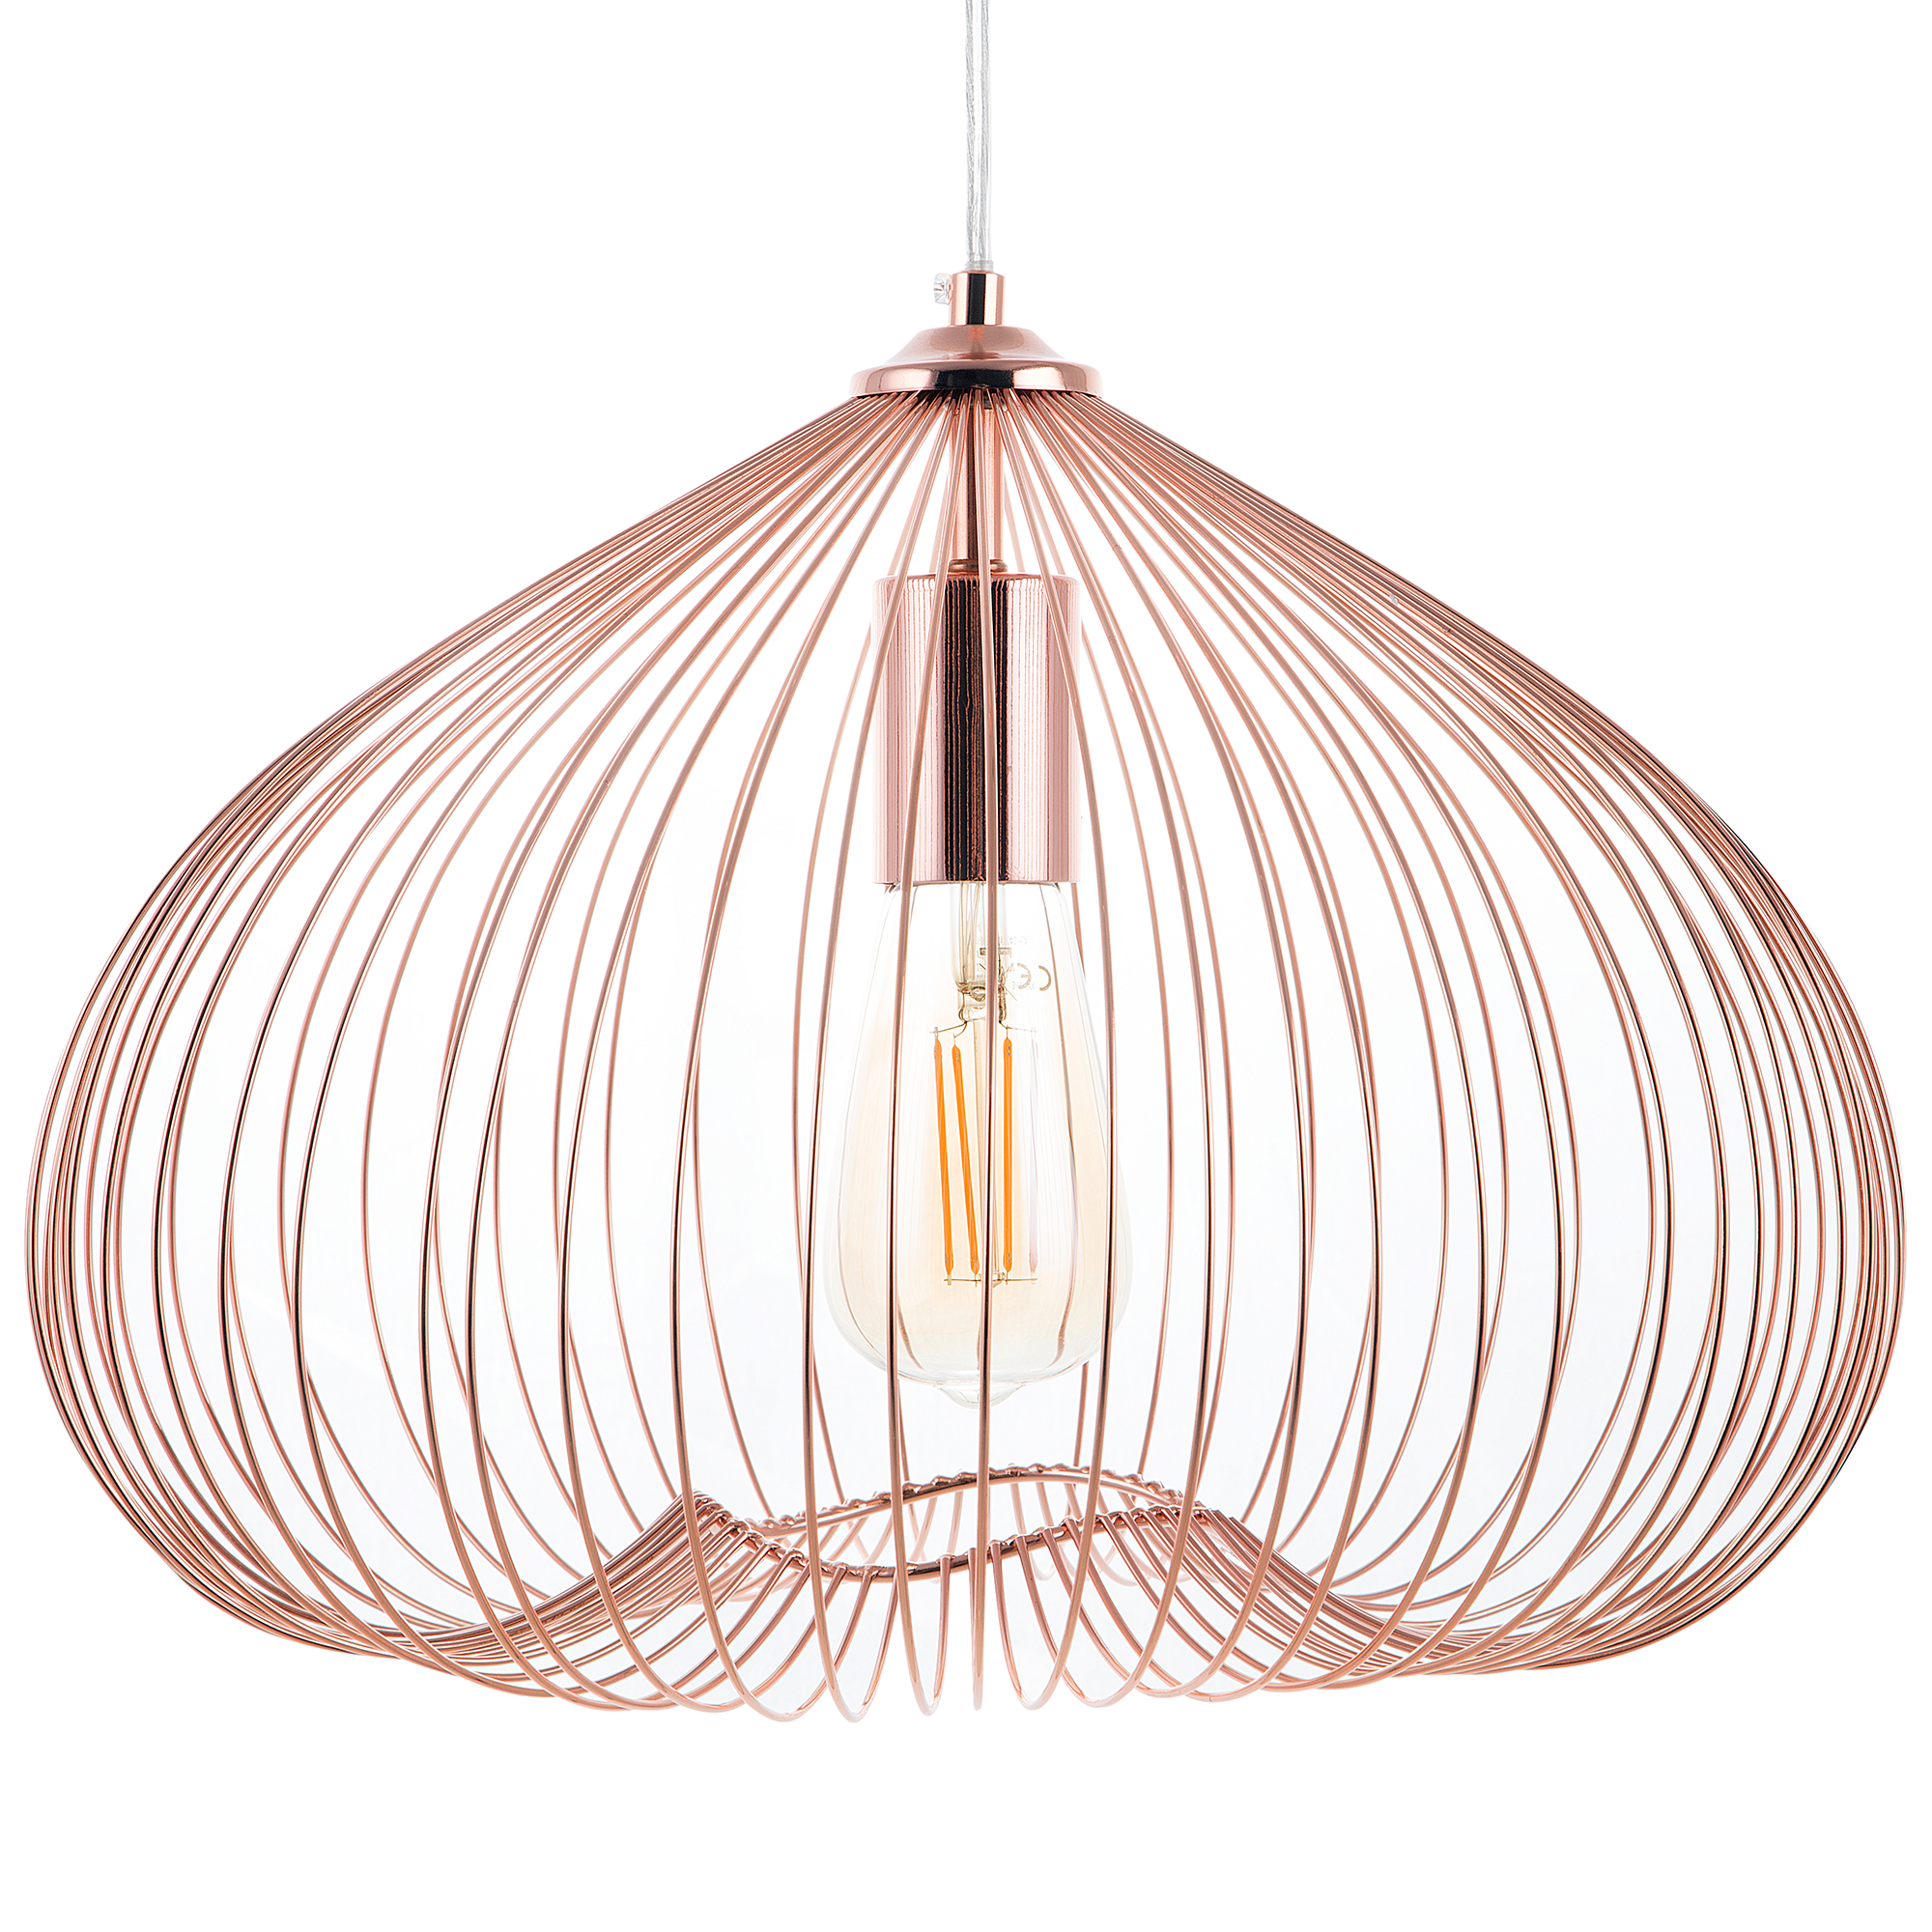 Beliani 1-Light Pendant Ceiling Copper Metal Shade Cage Wire Industrial